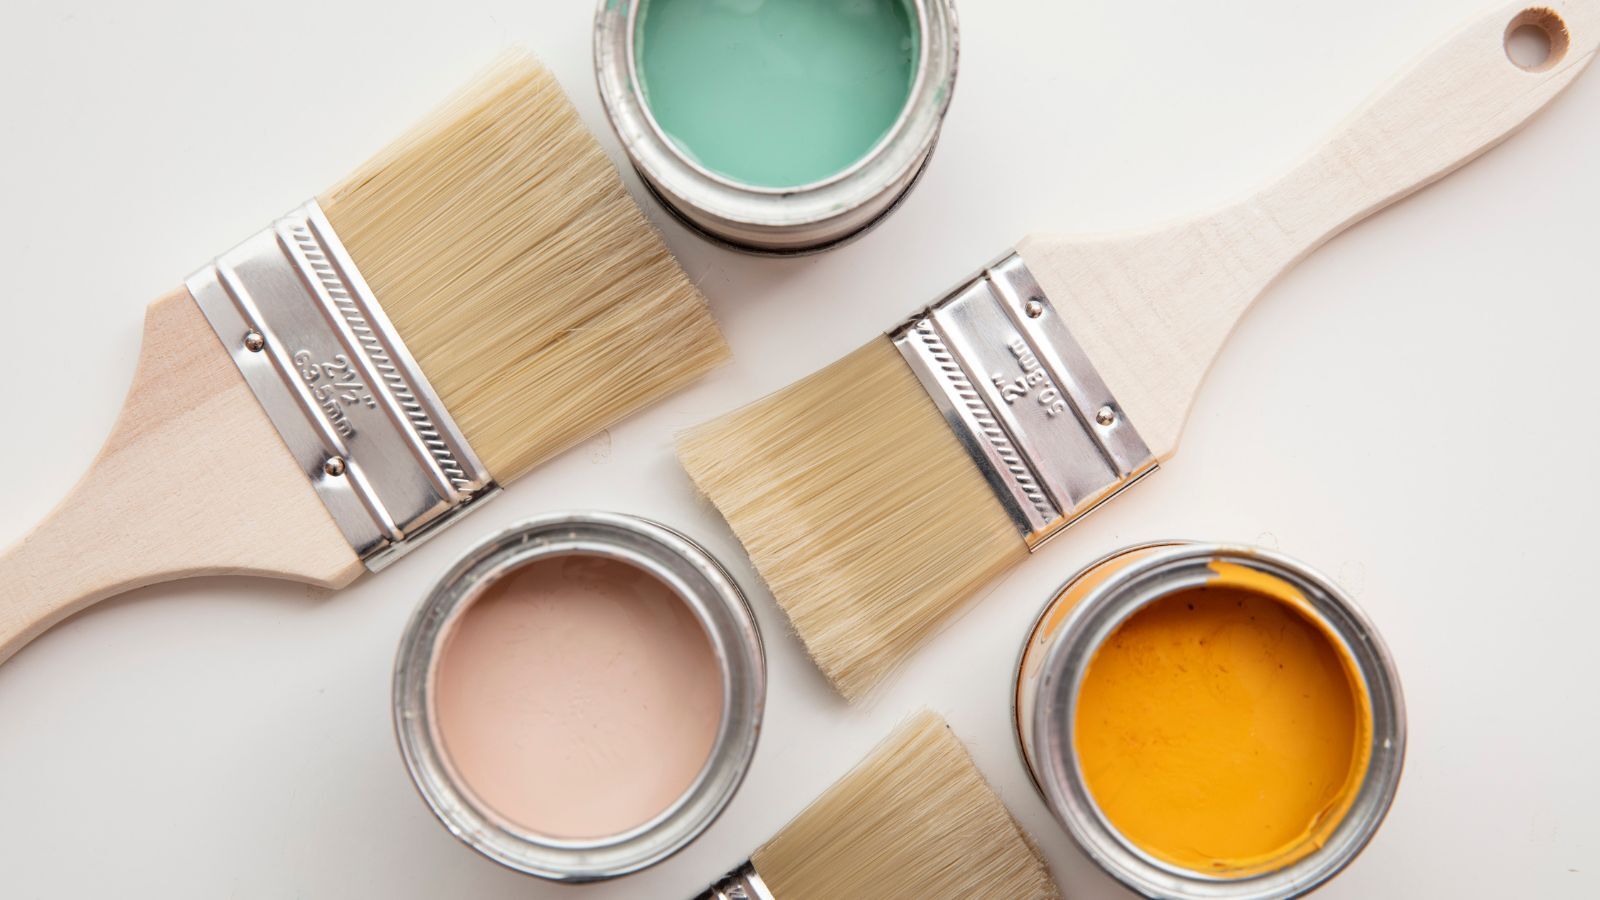 12 Best Paint Brands to Spruce Up Your Interior Walls